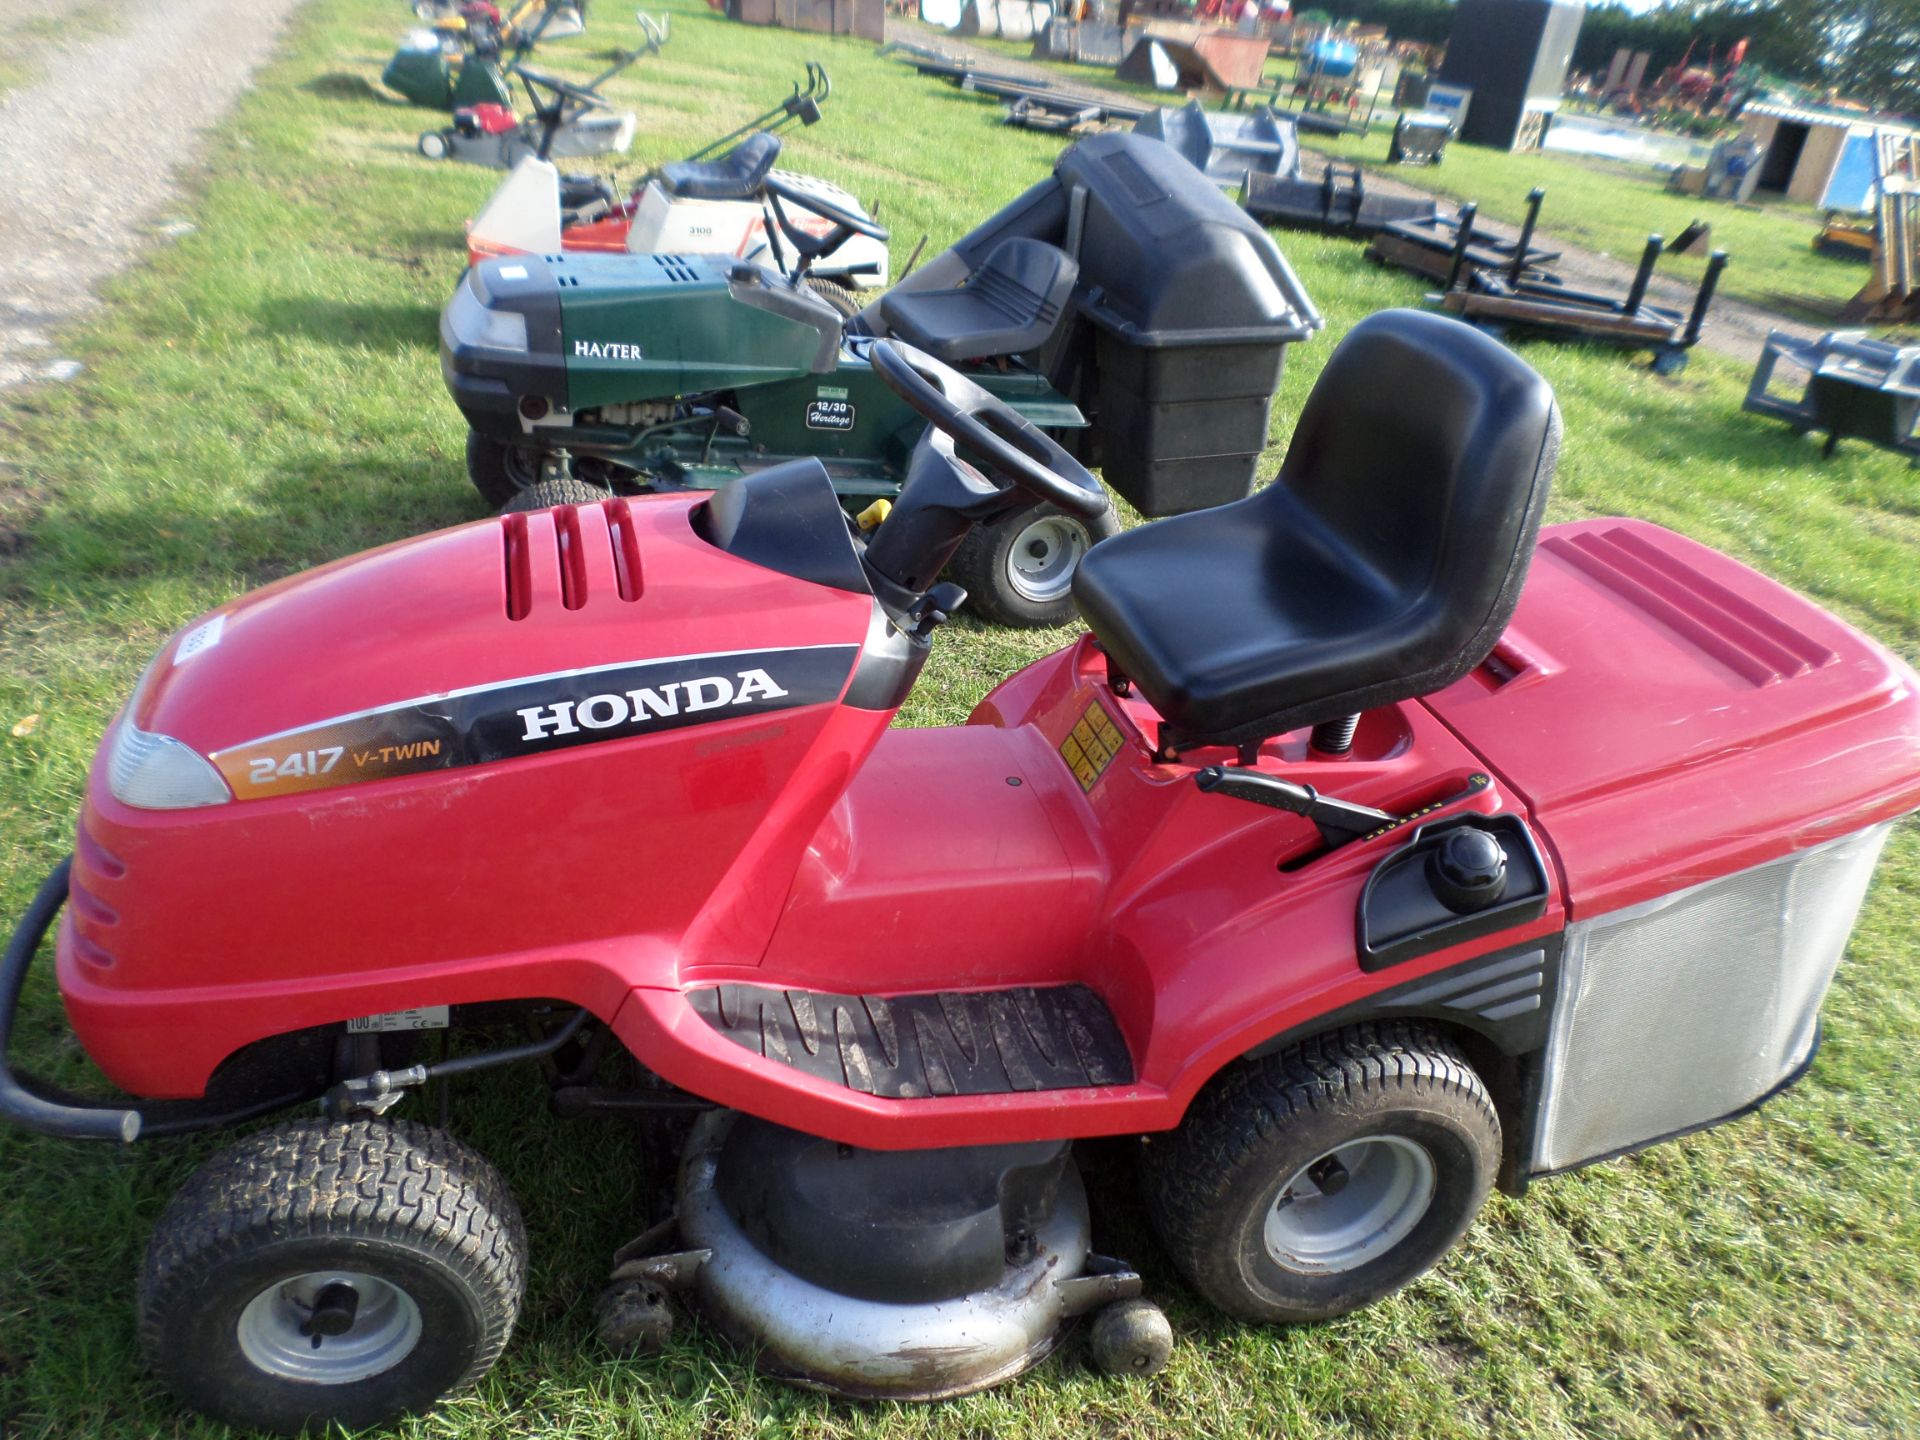 Honda 2417 direct collect ride on mower, hydrostatic drive, 17HP, twin cylinder engine, 42" cut, - Image 2 of 2